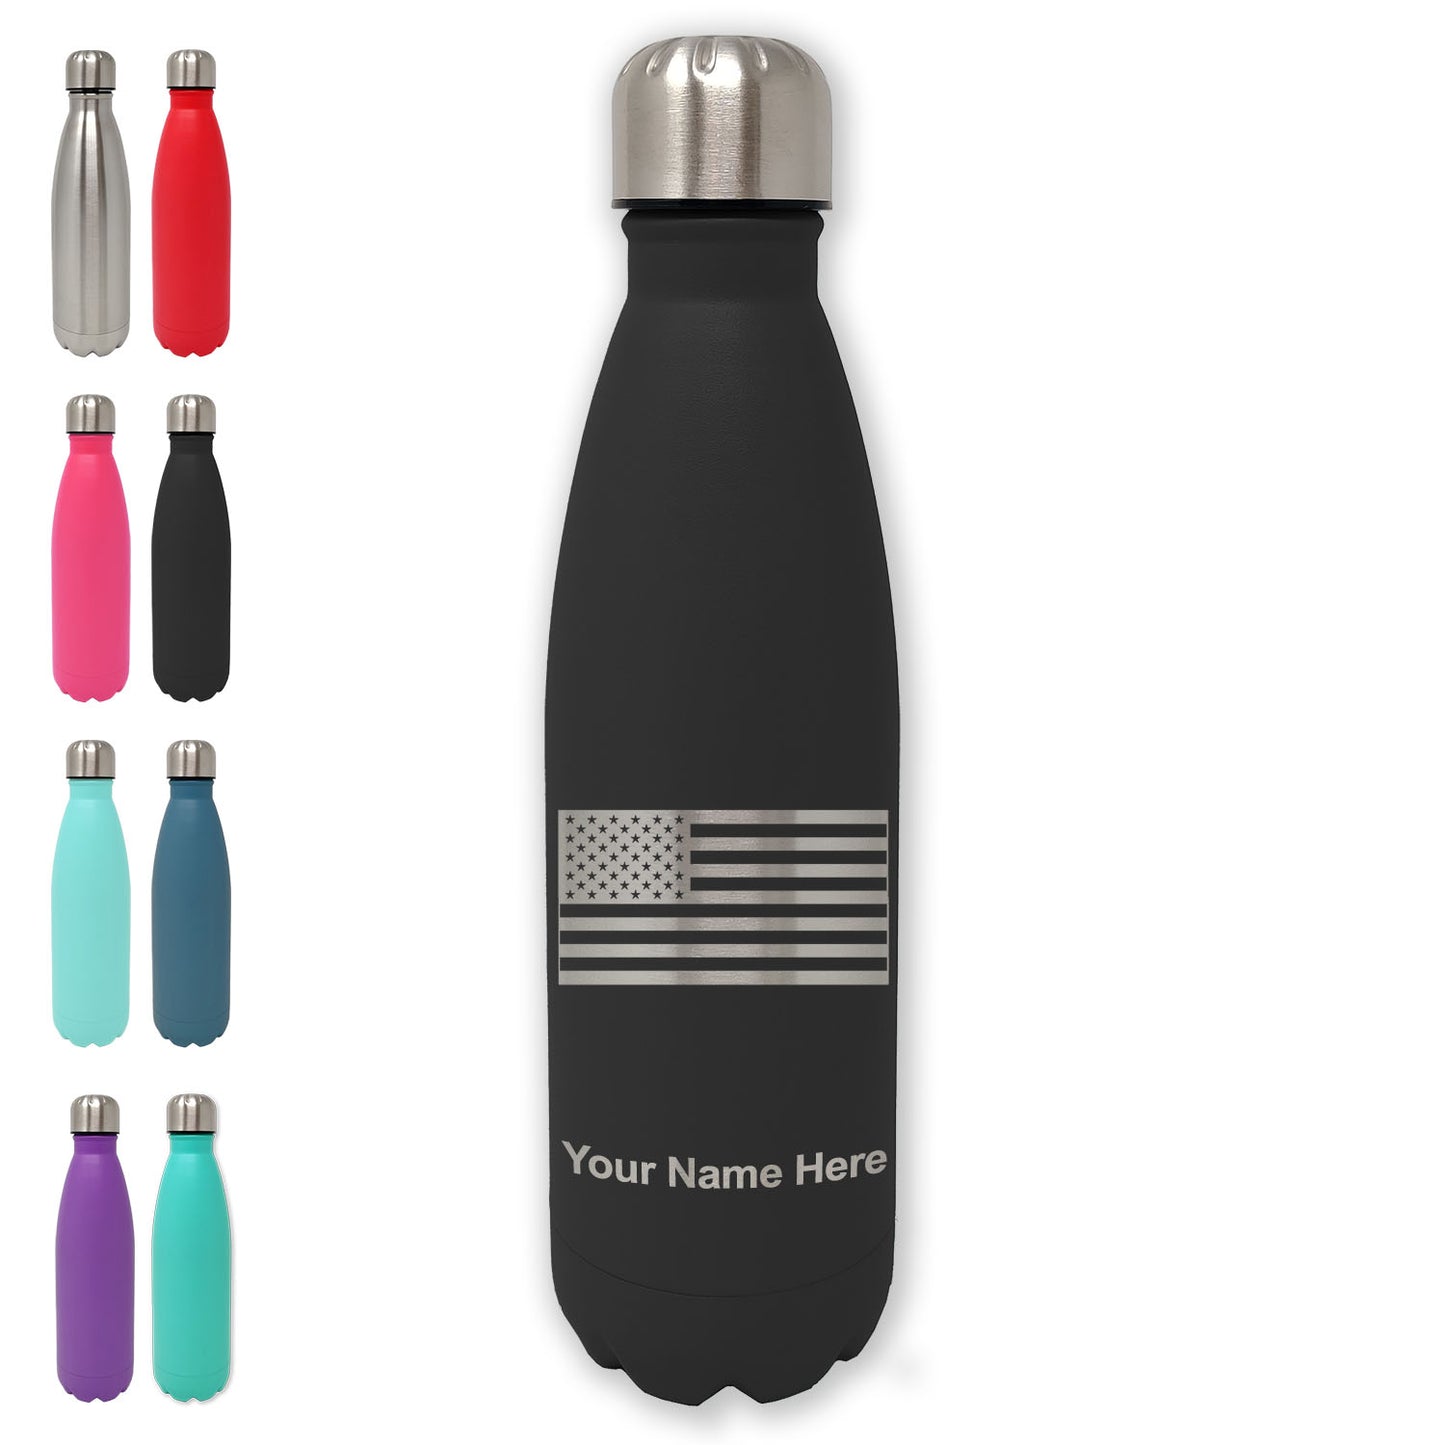 LaserGram Double Wall Water Bottle, Flag of the United States, Personalized Engraving Included